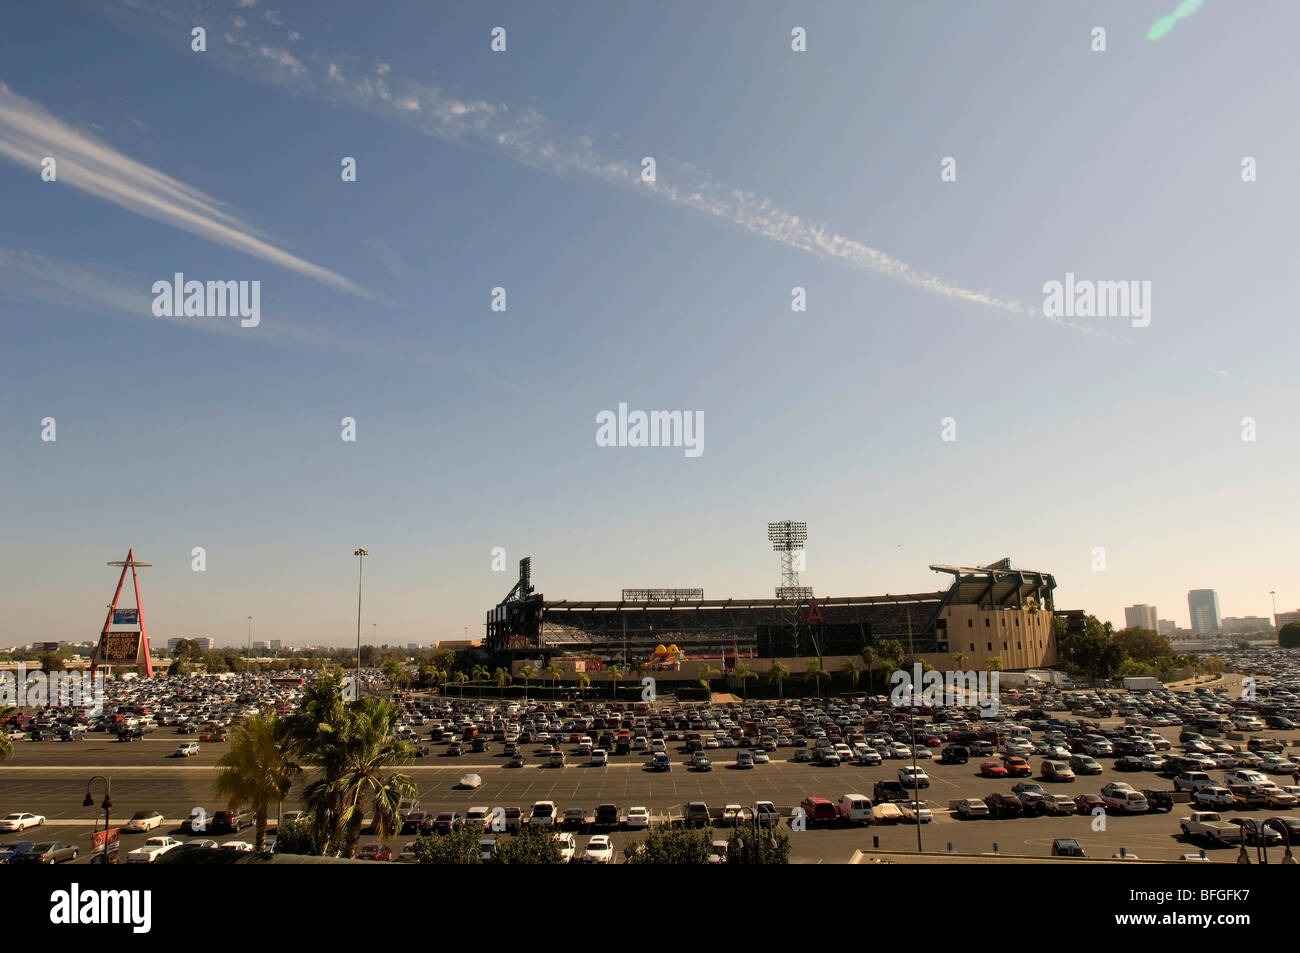 Anaheim Angel Stadium parking lot, viewed from a distance to show the seating and parking lot areas. Stock Photo